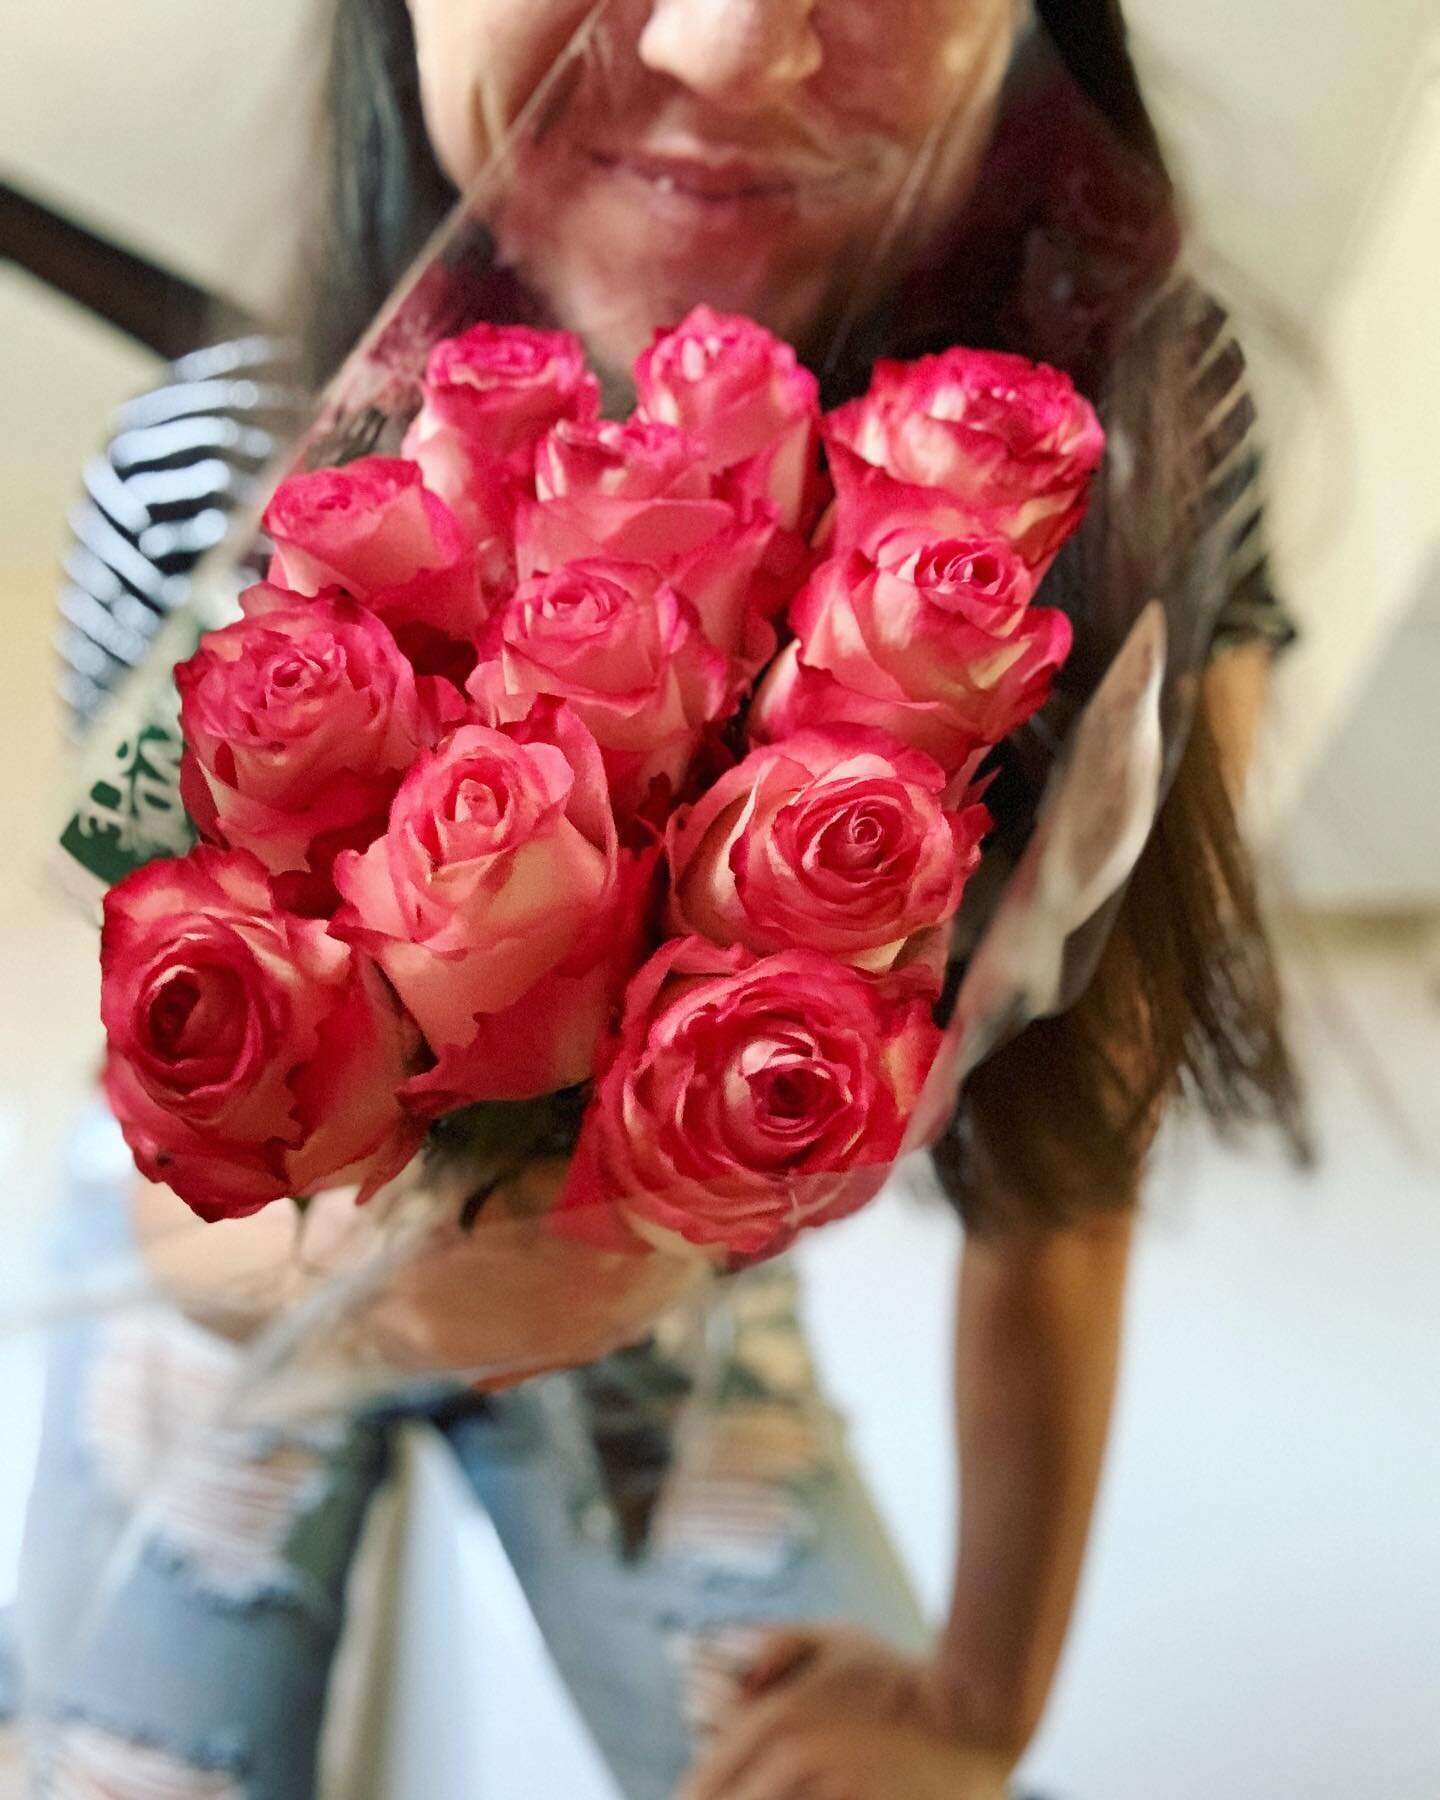 I got flowers to myself, from myself. And you know what?

These roses stuck, not a thorn in me, but truth in me. 

You get to feel worthy and deserving now.

You get to celebrate your accomplishments now, even if &ldquo;small&rdquo;.

You get to be a